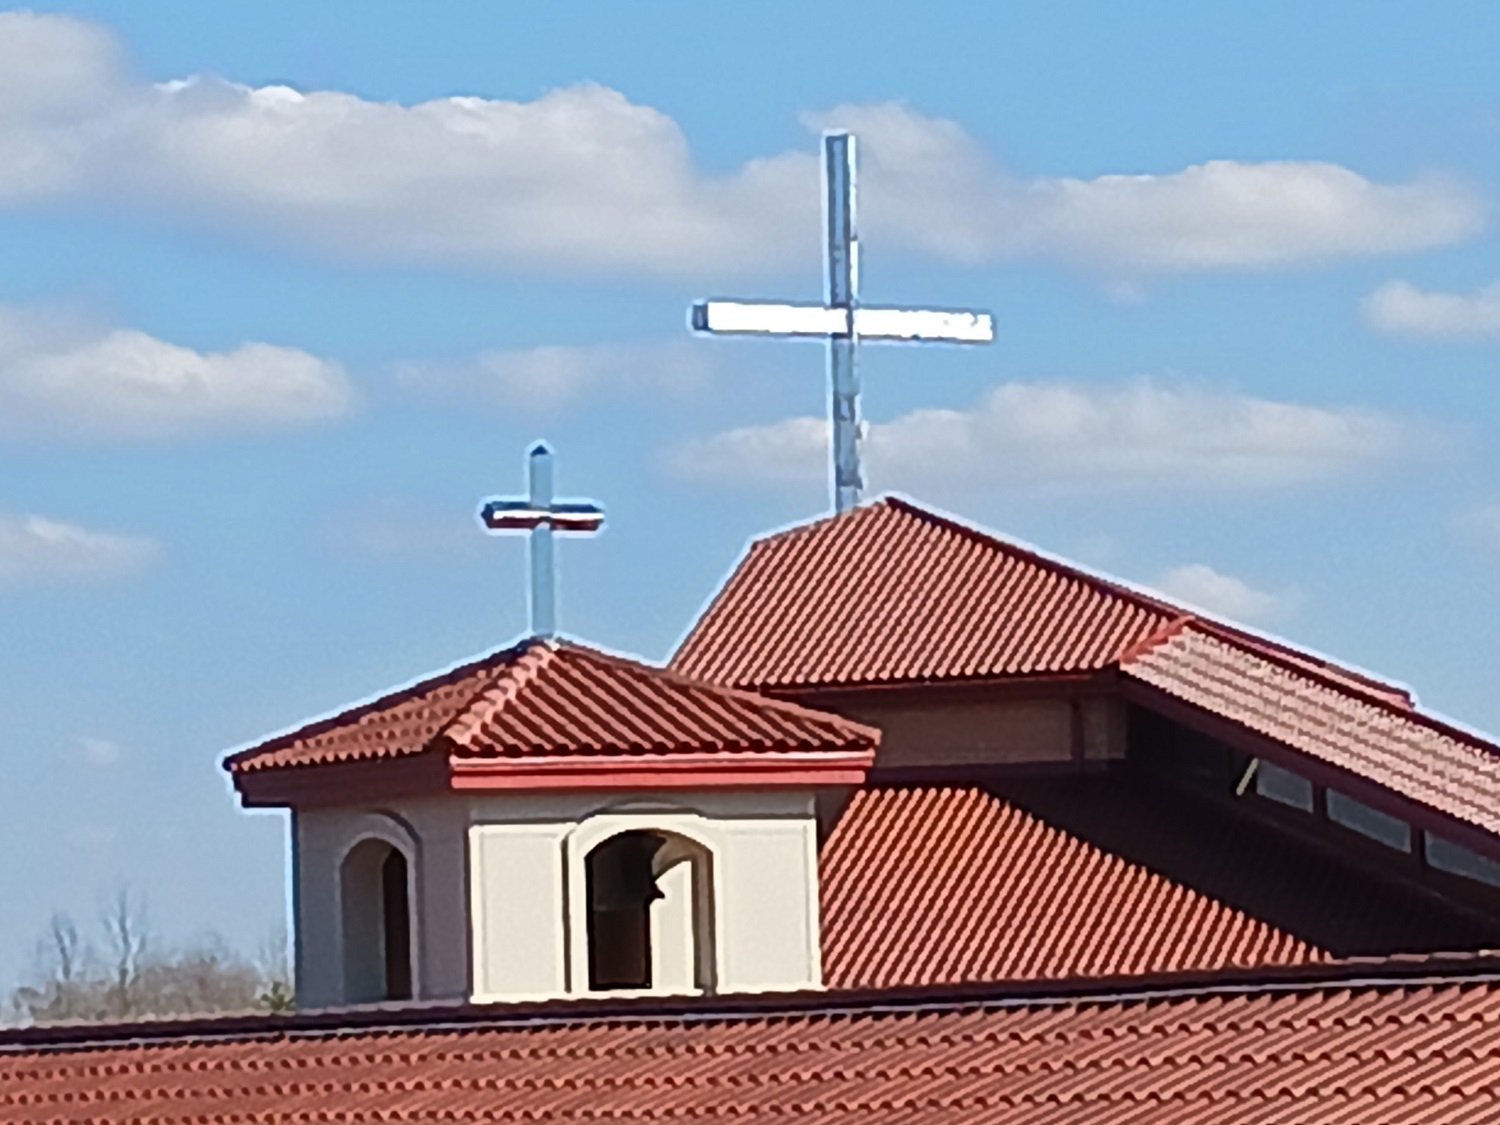 March 10 - The new small cross is a scale model of the large chapel cross